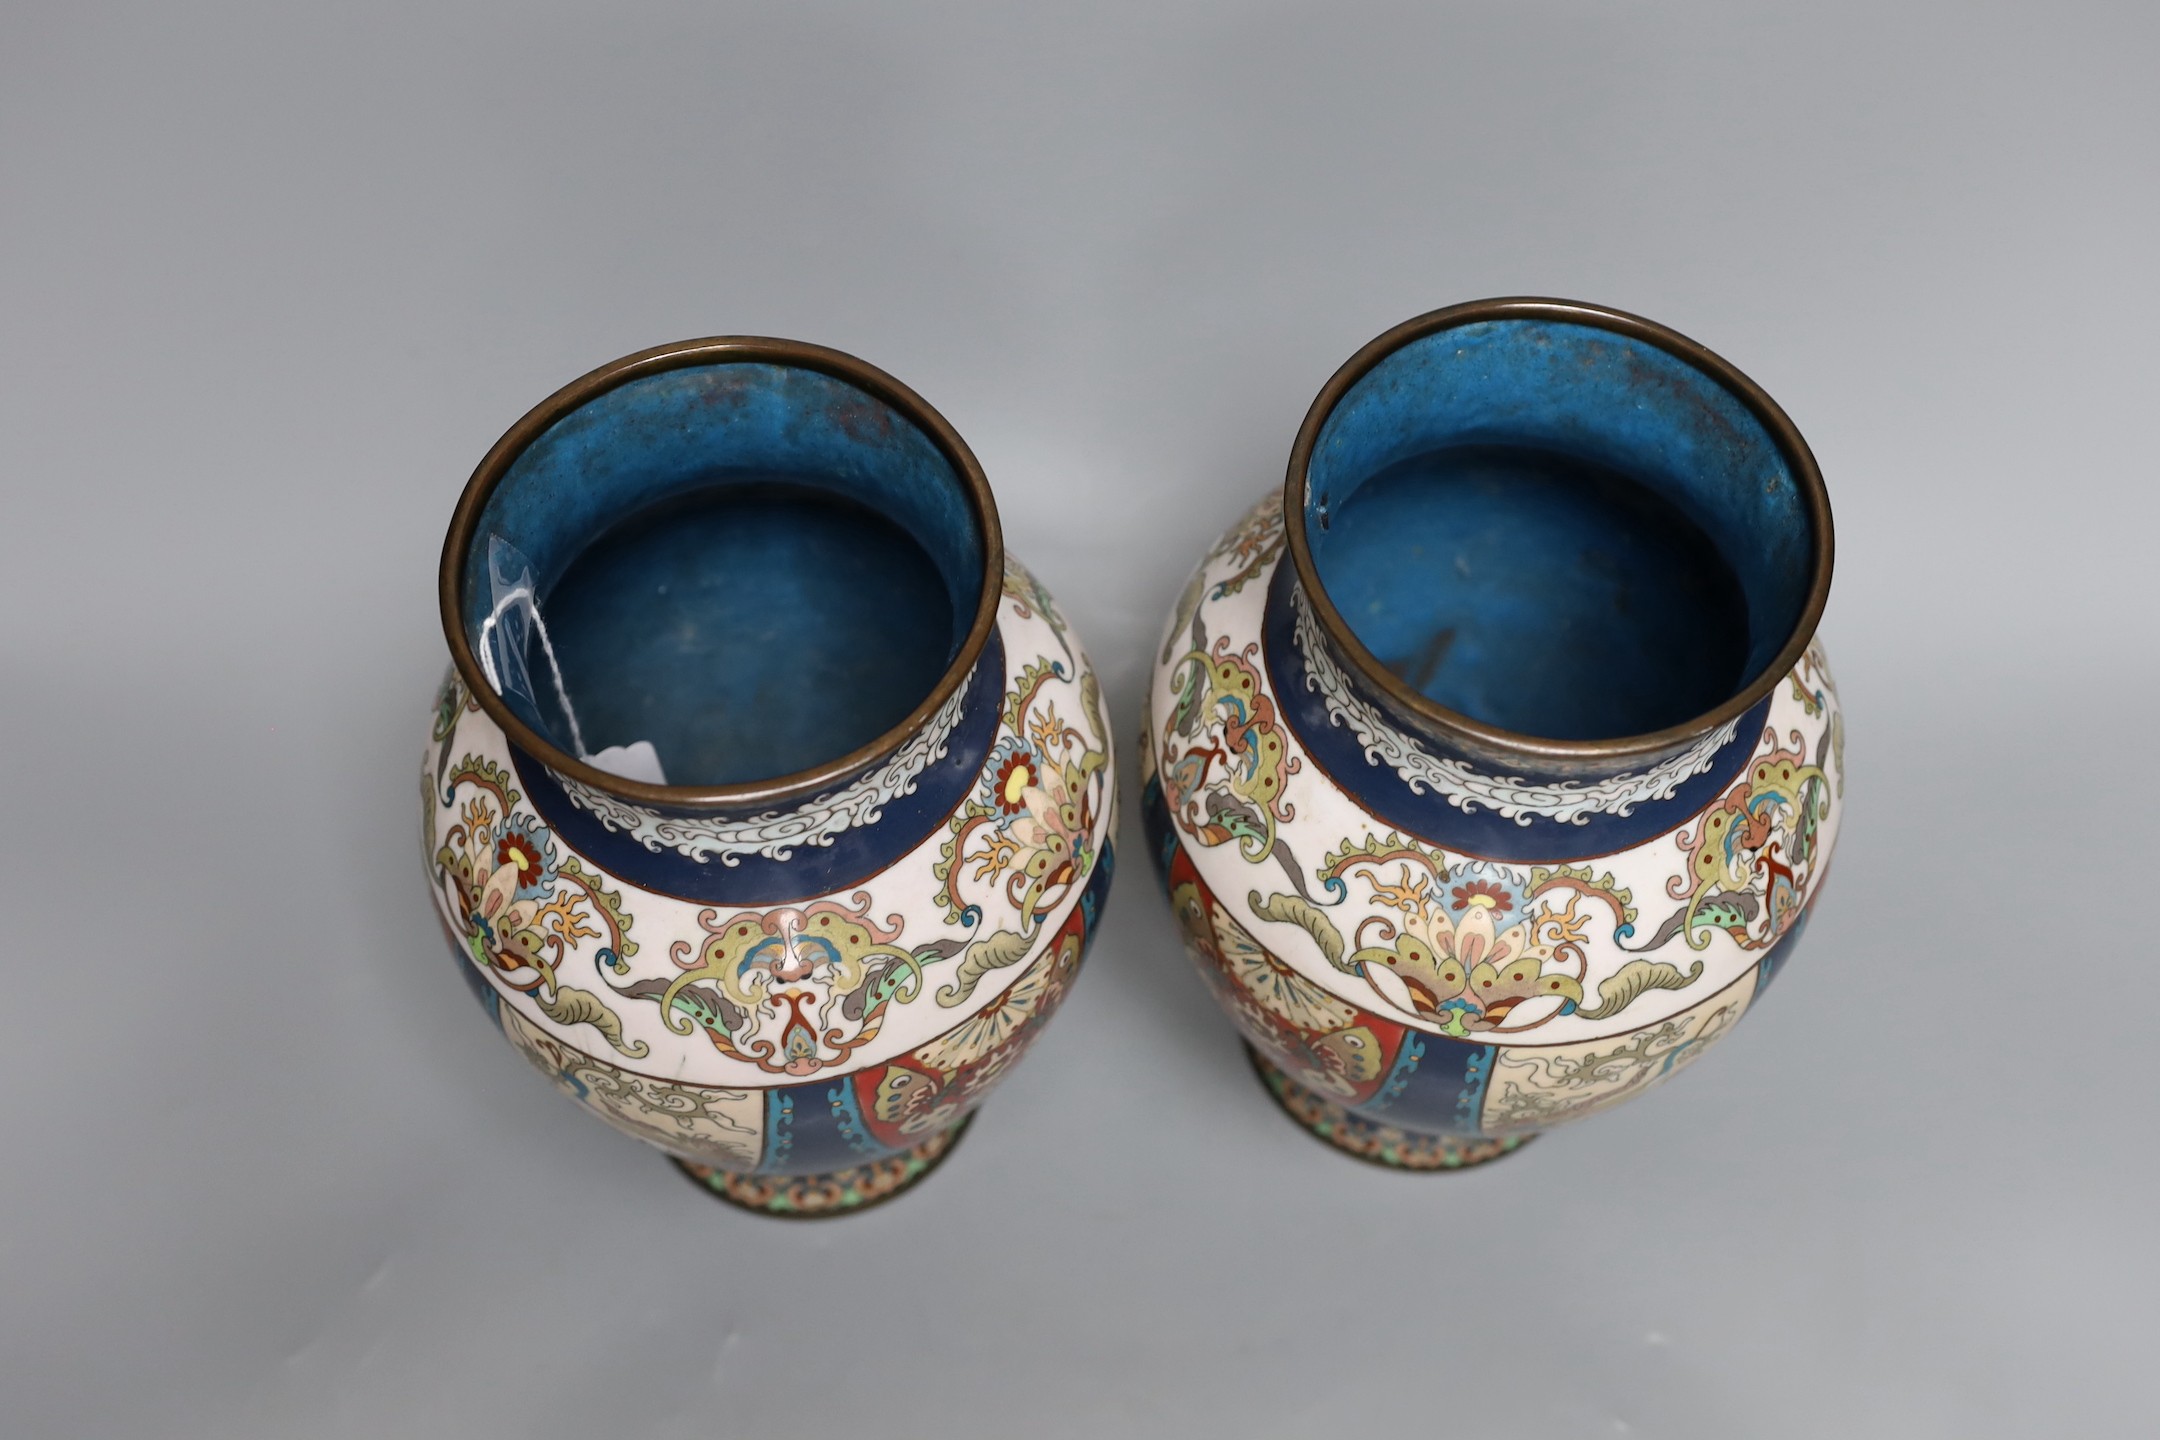 A pair of Japanese cloisonné enamel vases, probably Kyoto, early 20th century, 25cms high